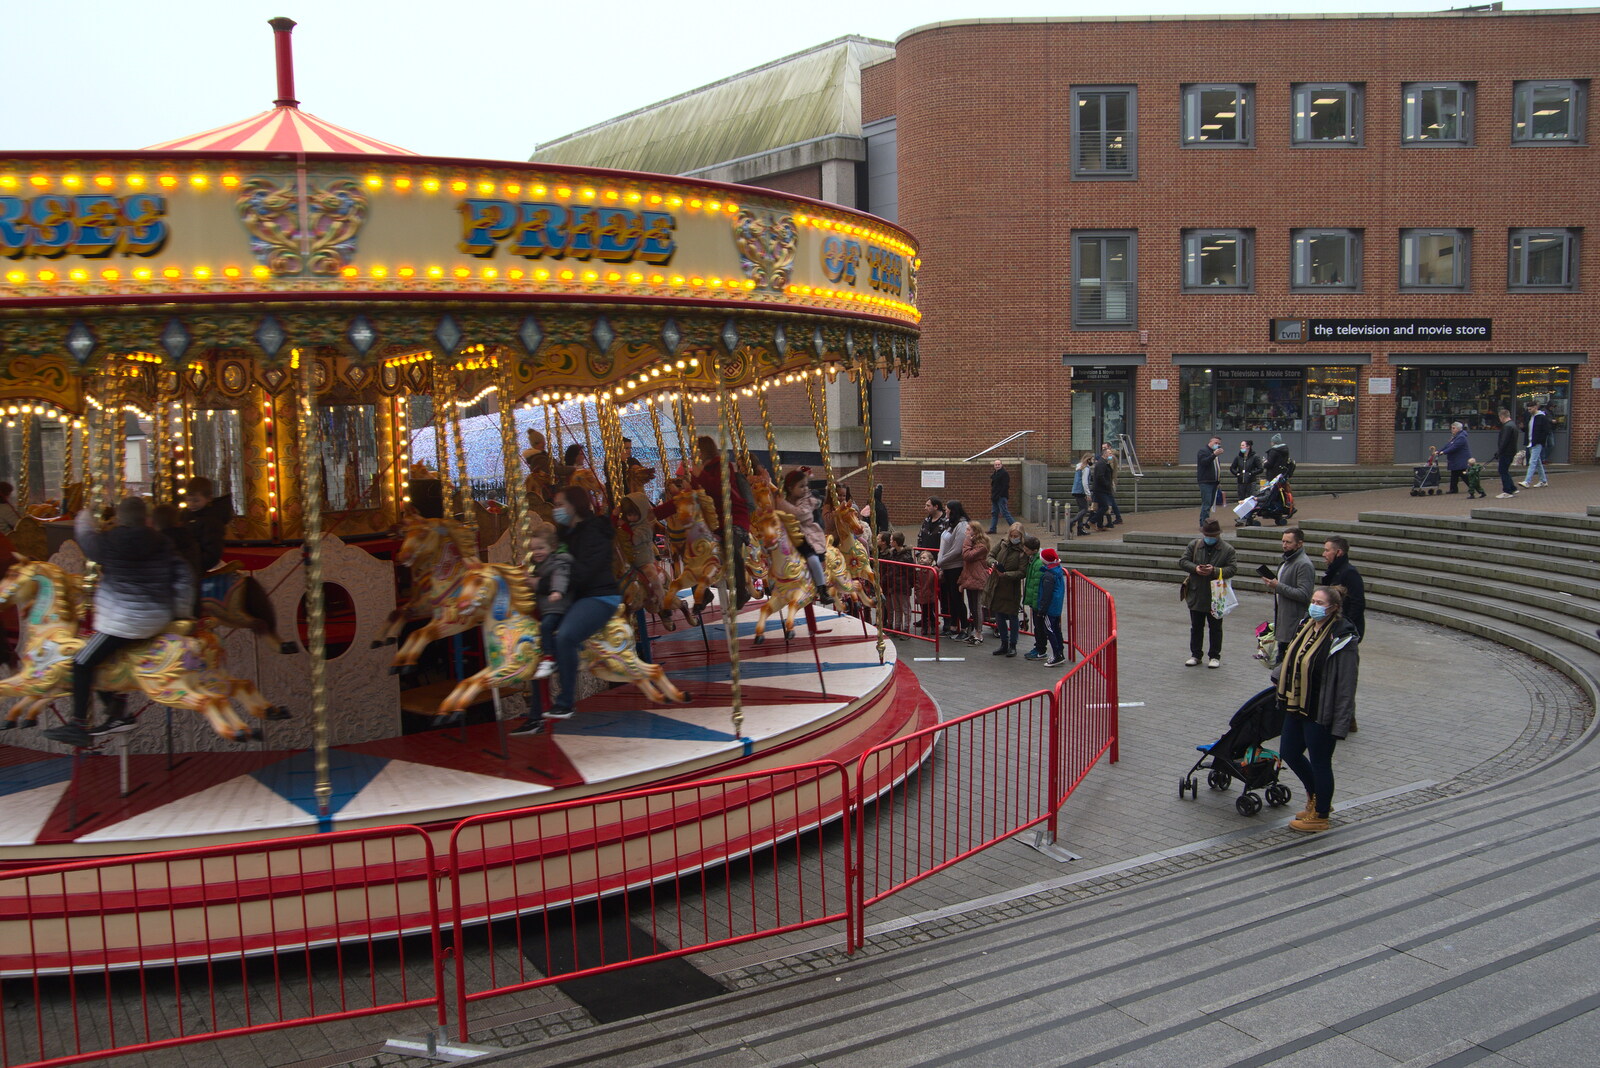 There's a carousel doing the rounds from Scooters and a Bit of Christmas Shopping, Eye and Norwich, Norfolk - 23rd December 2021